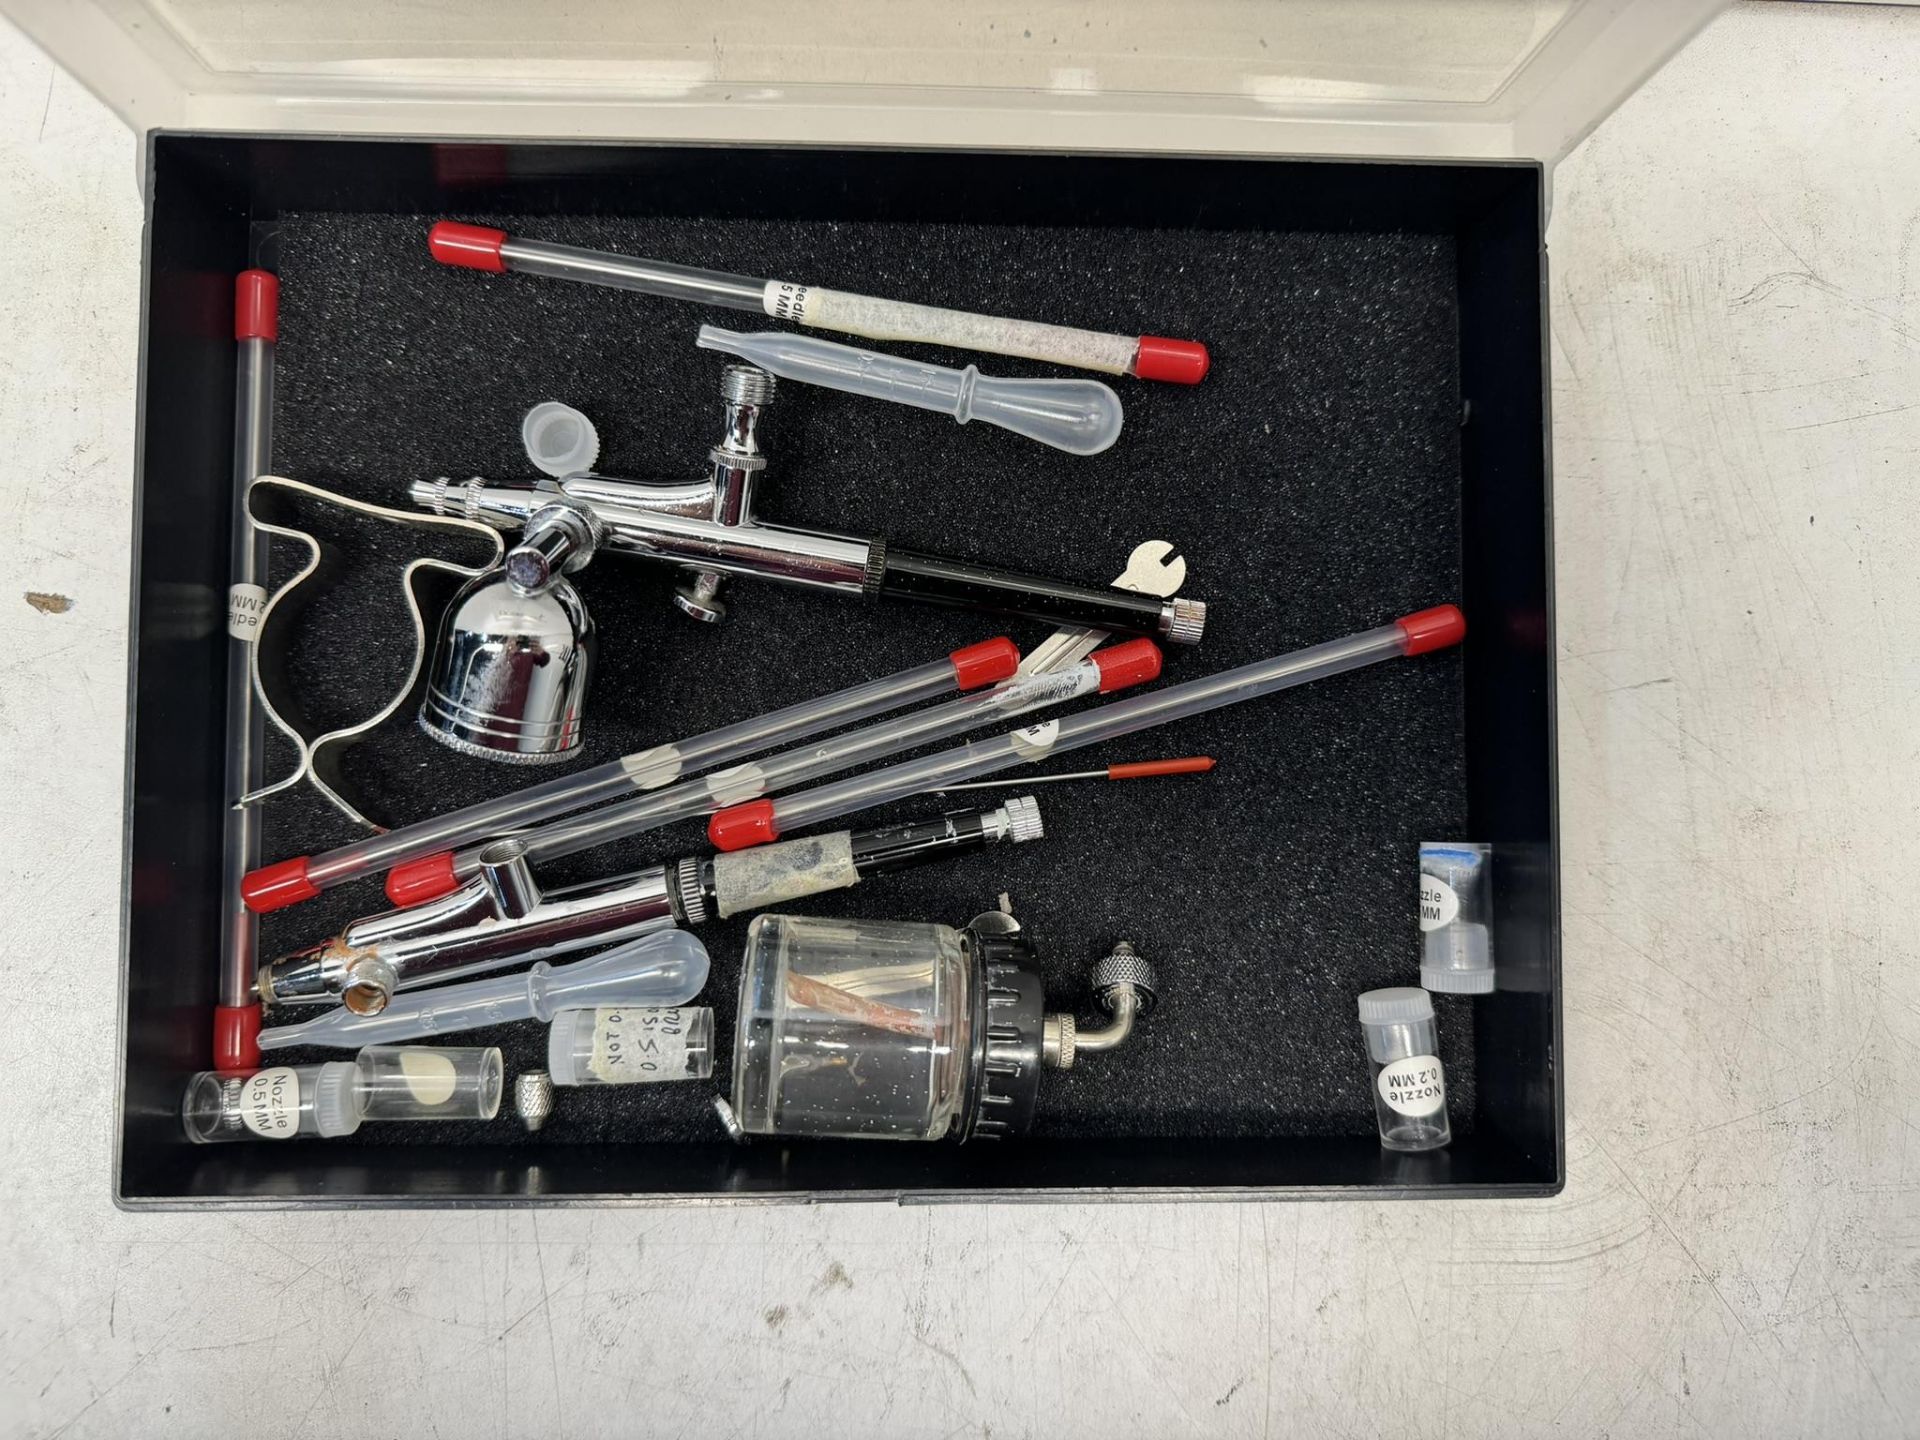 Incomplete Airbrush Set As Seen In Photos - Image 2 of 3